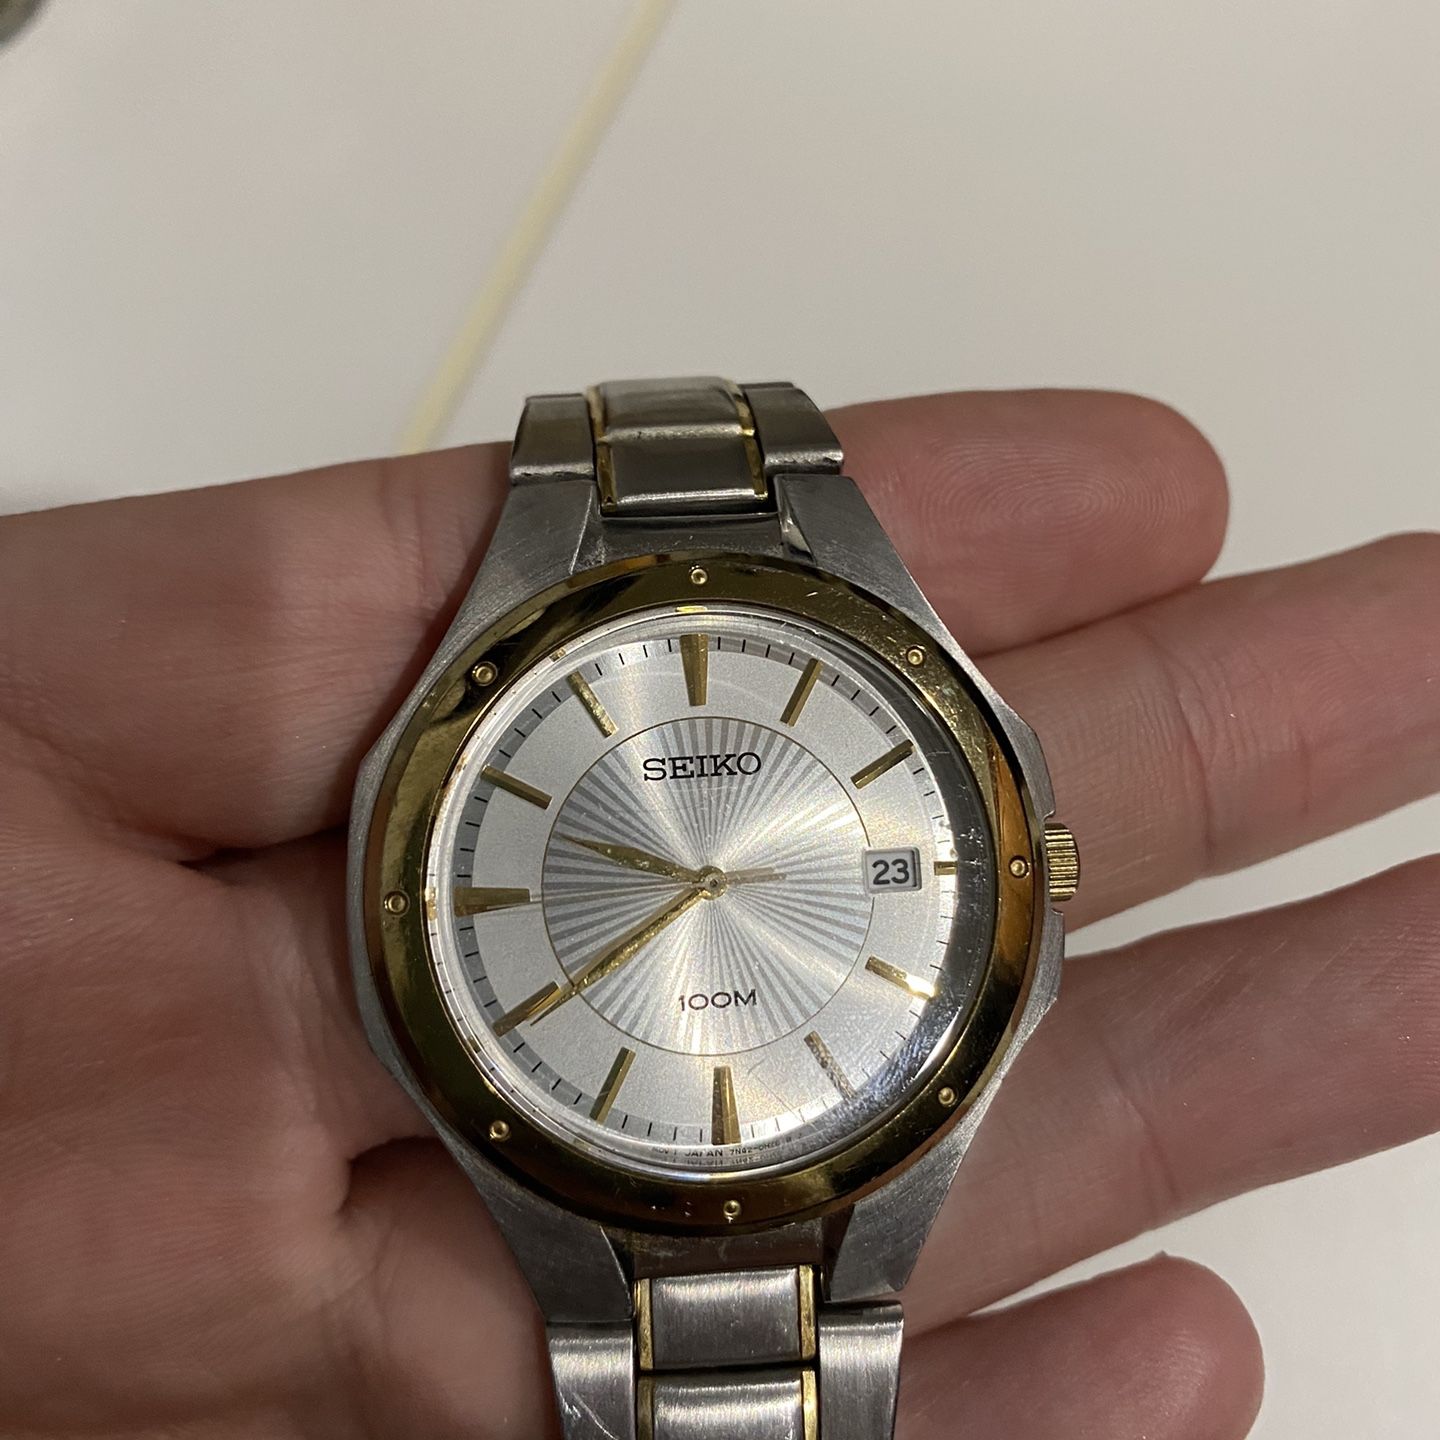 Seiko 7n42-0fd0 for Sale in New York, NY - OfferUp